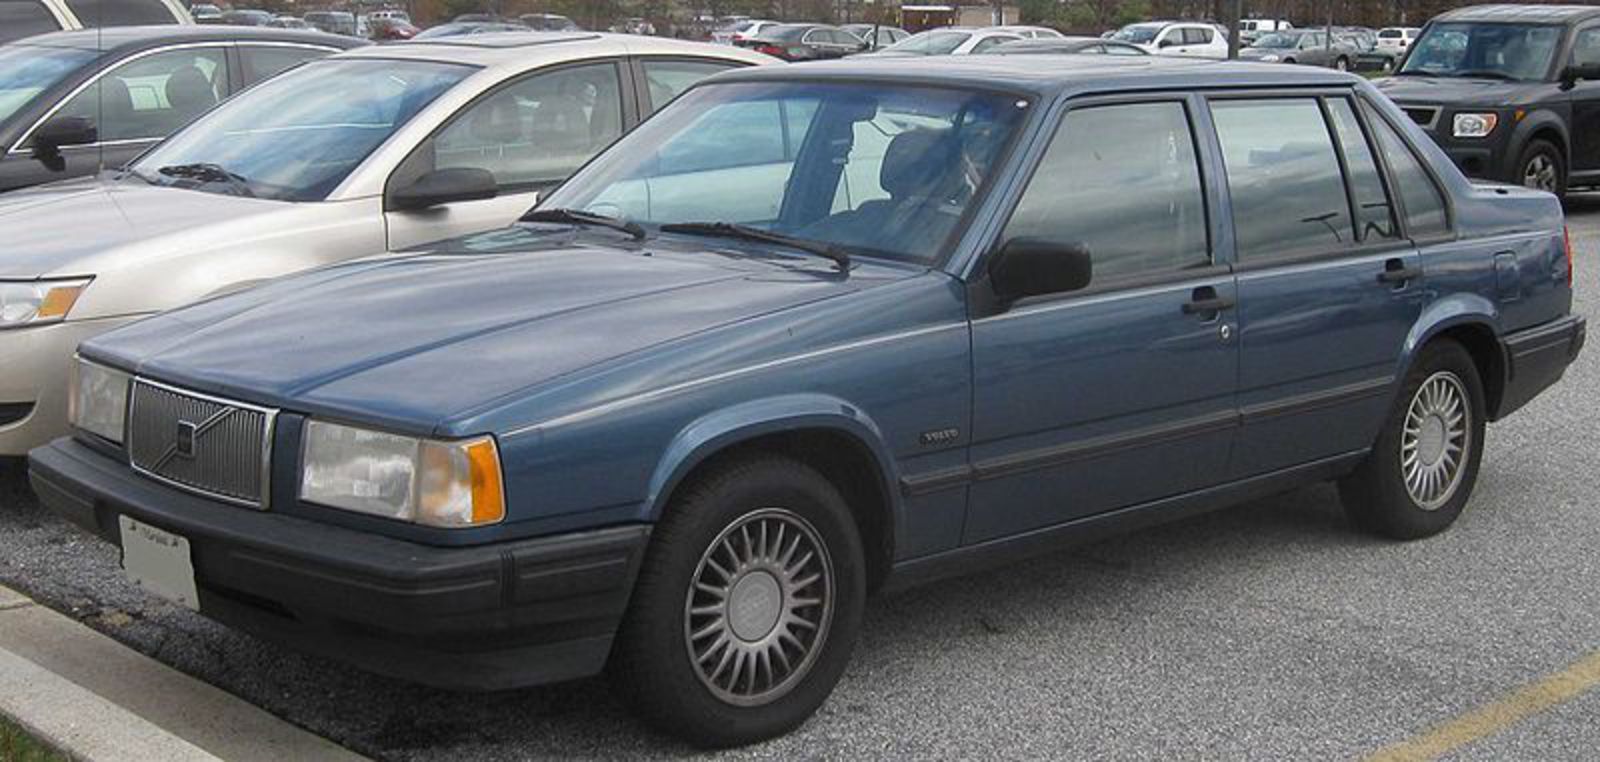 Volvo 940 150. The Volvo 940 is among the variants of the 900 series of